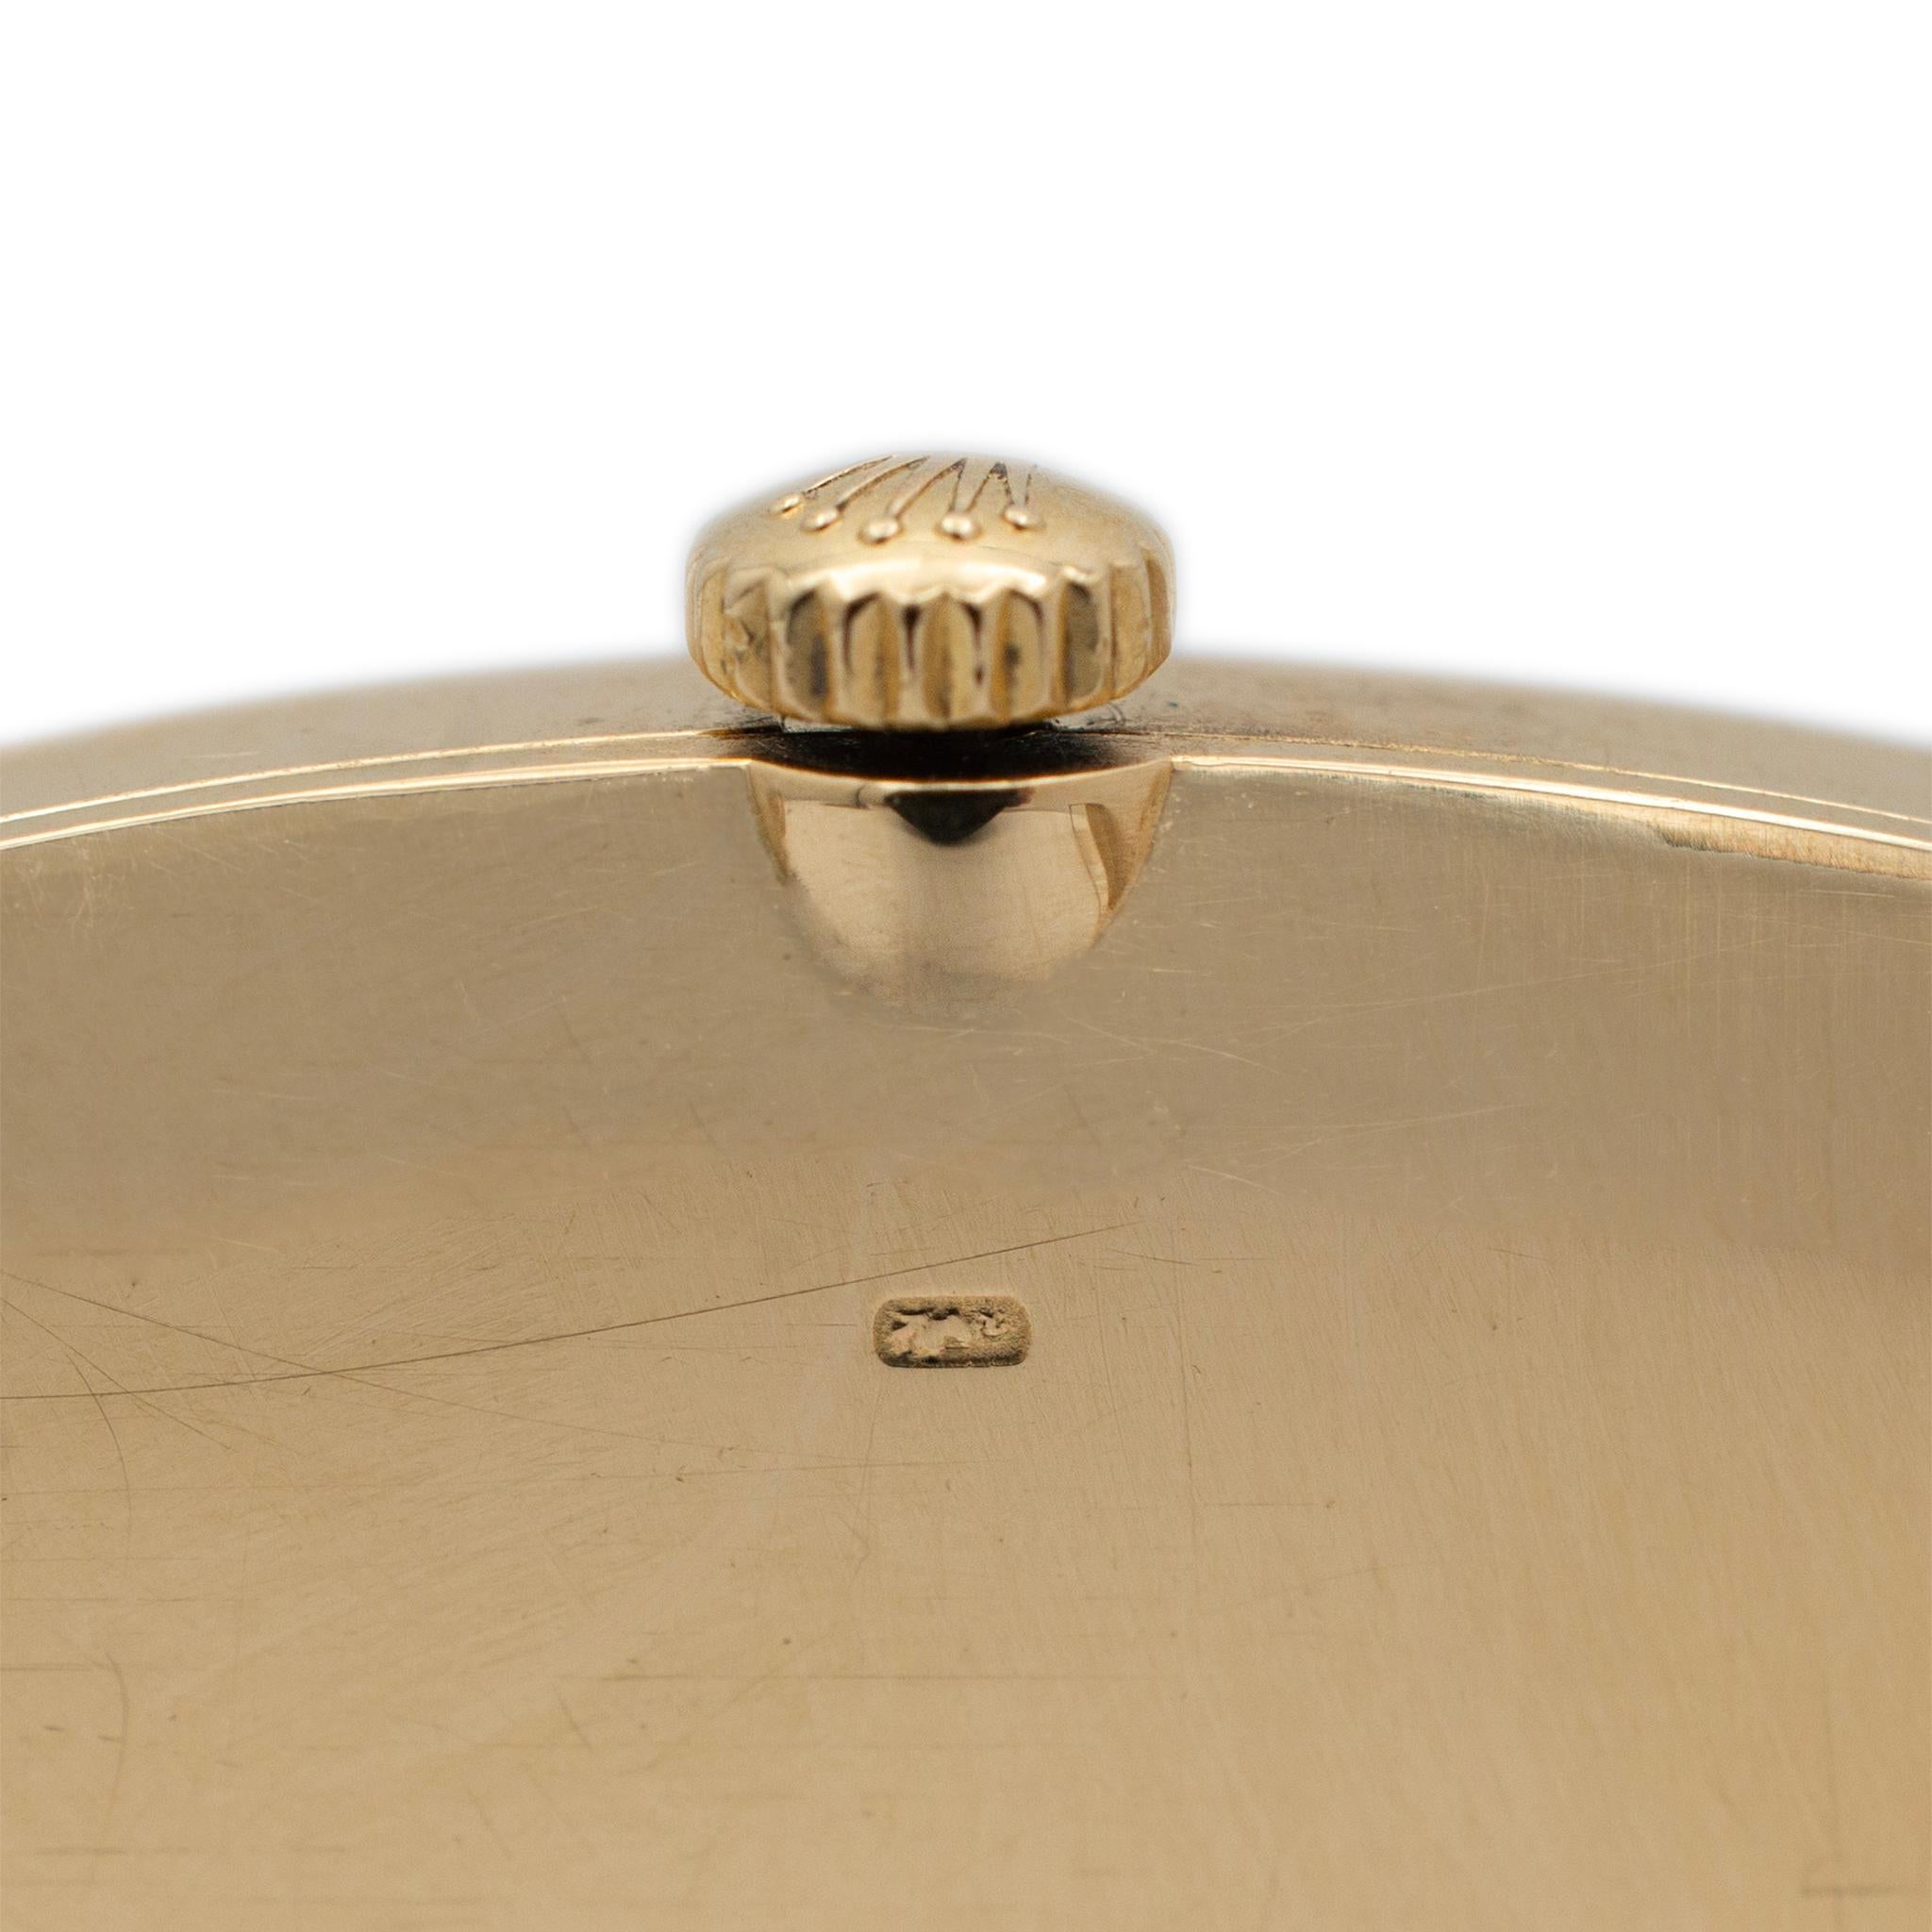 Vintage Rolex Cellini 26MM 3807 Champagne Dial 18K Yellow Gold Watch For Sale 2